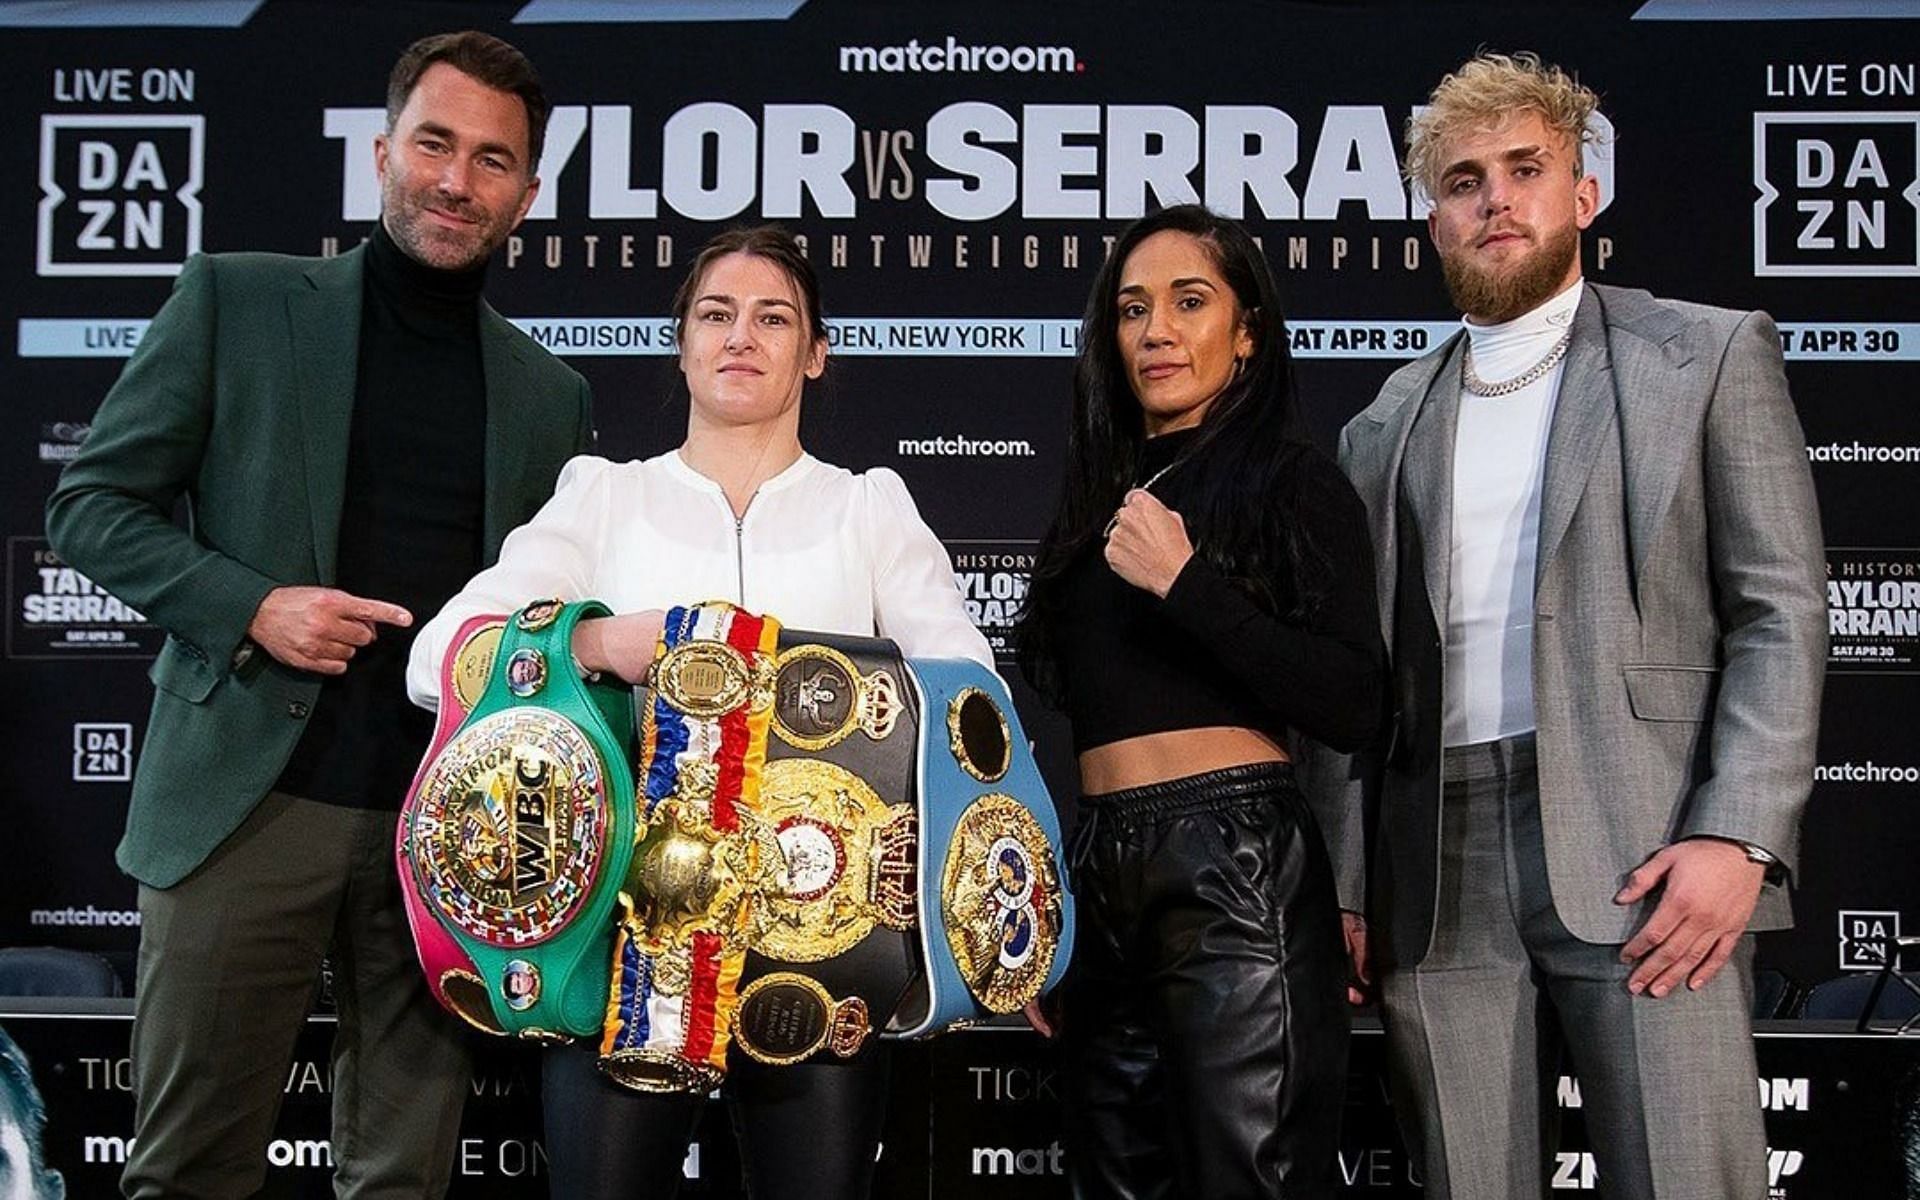 Co-promoters Eddie Hearn (left) and Jake Paul (right) with Katie Taylor and Amanda Serrano (center) at MSG [Image Credit: @matchroomboxing on Instagram]